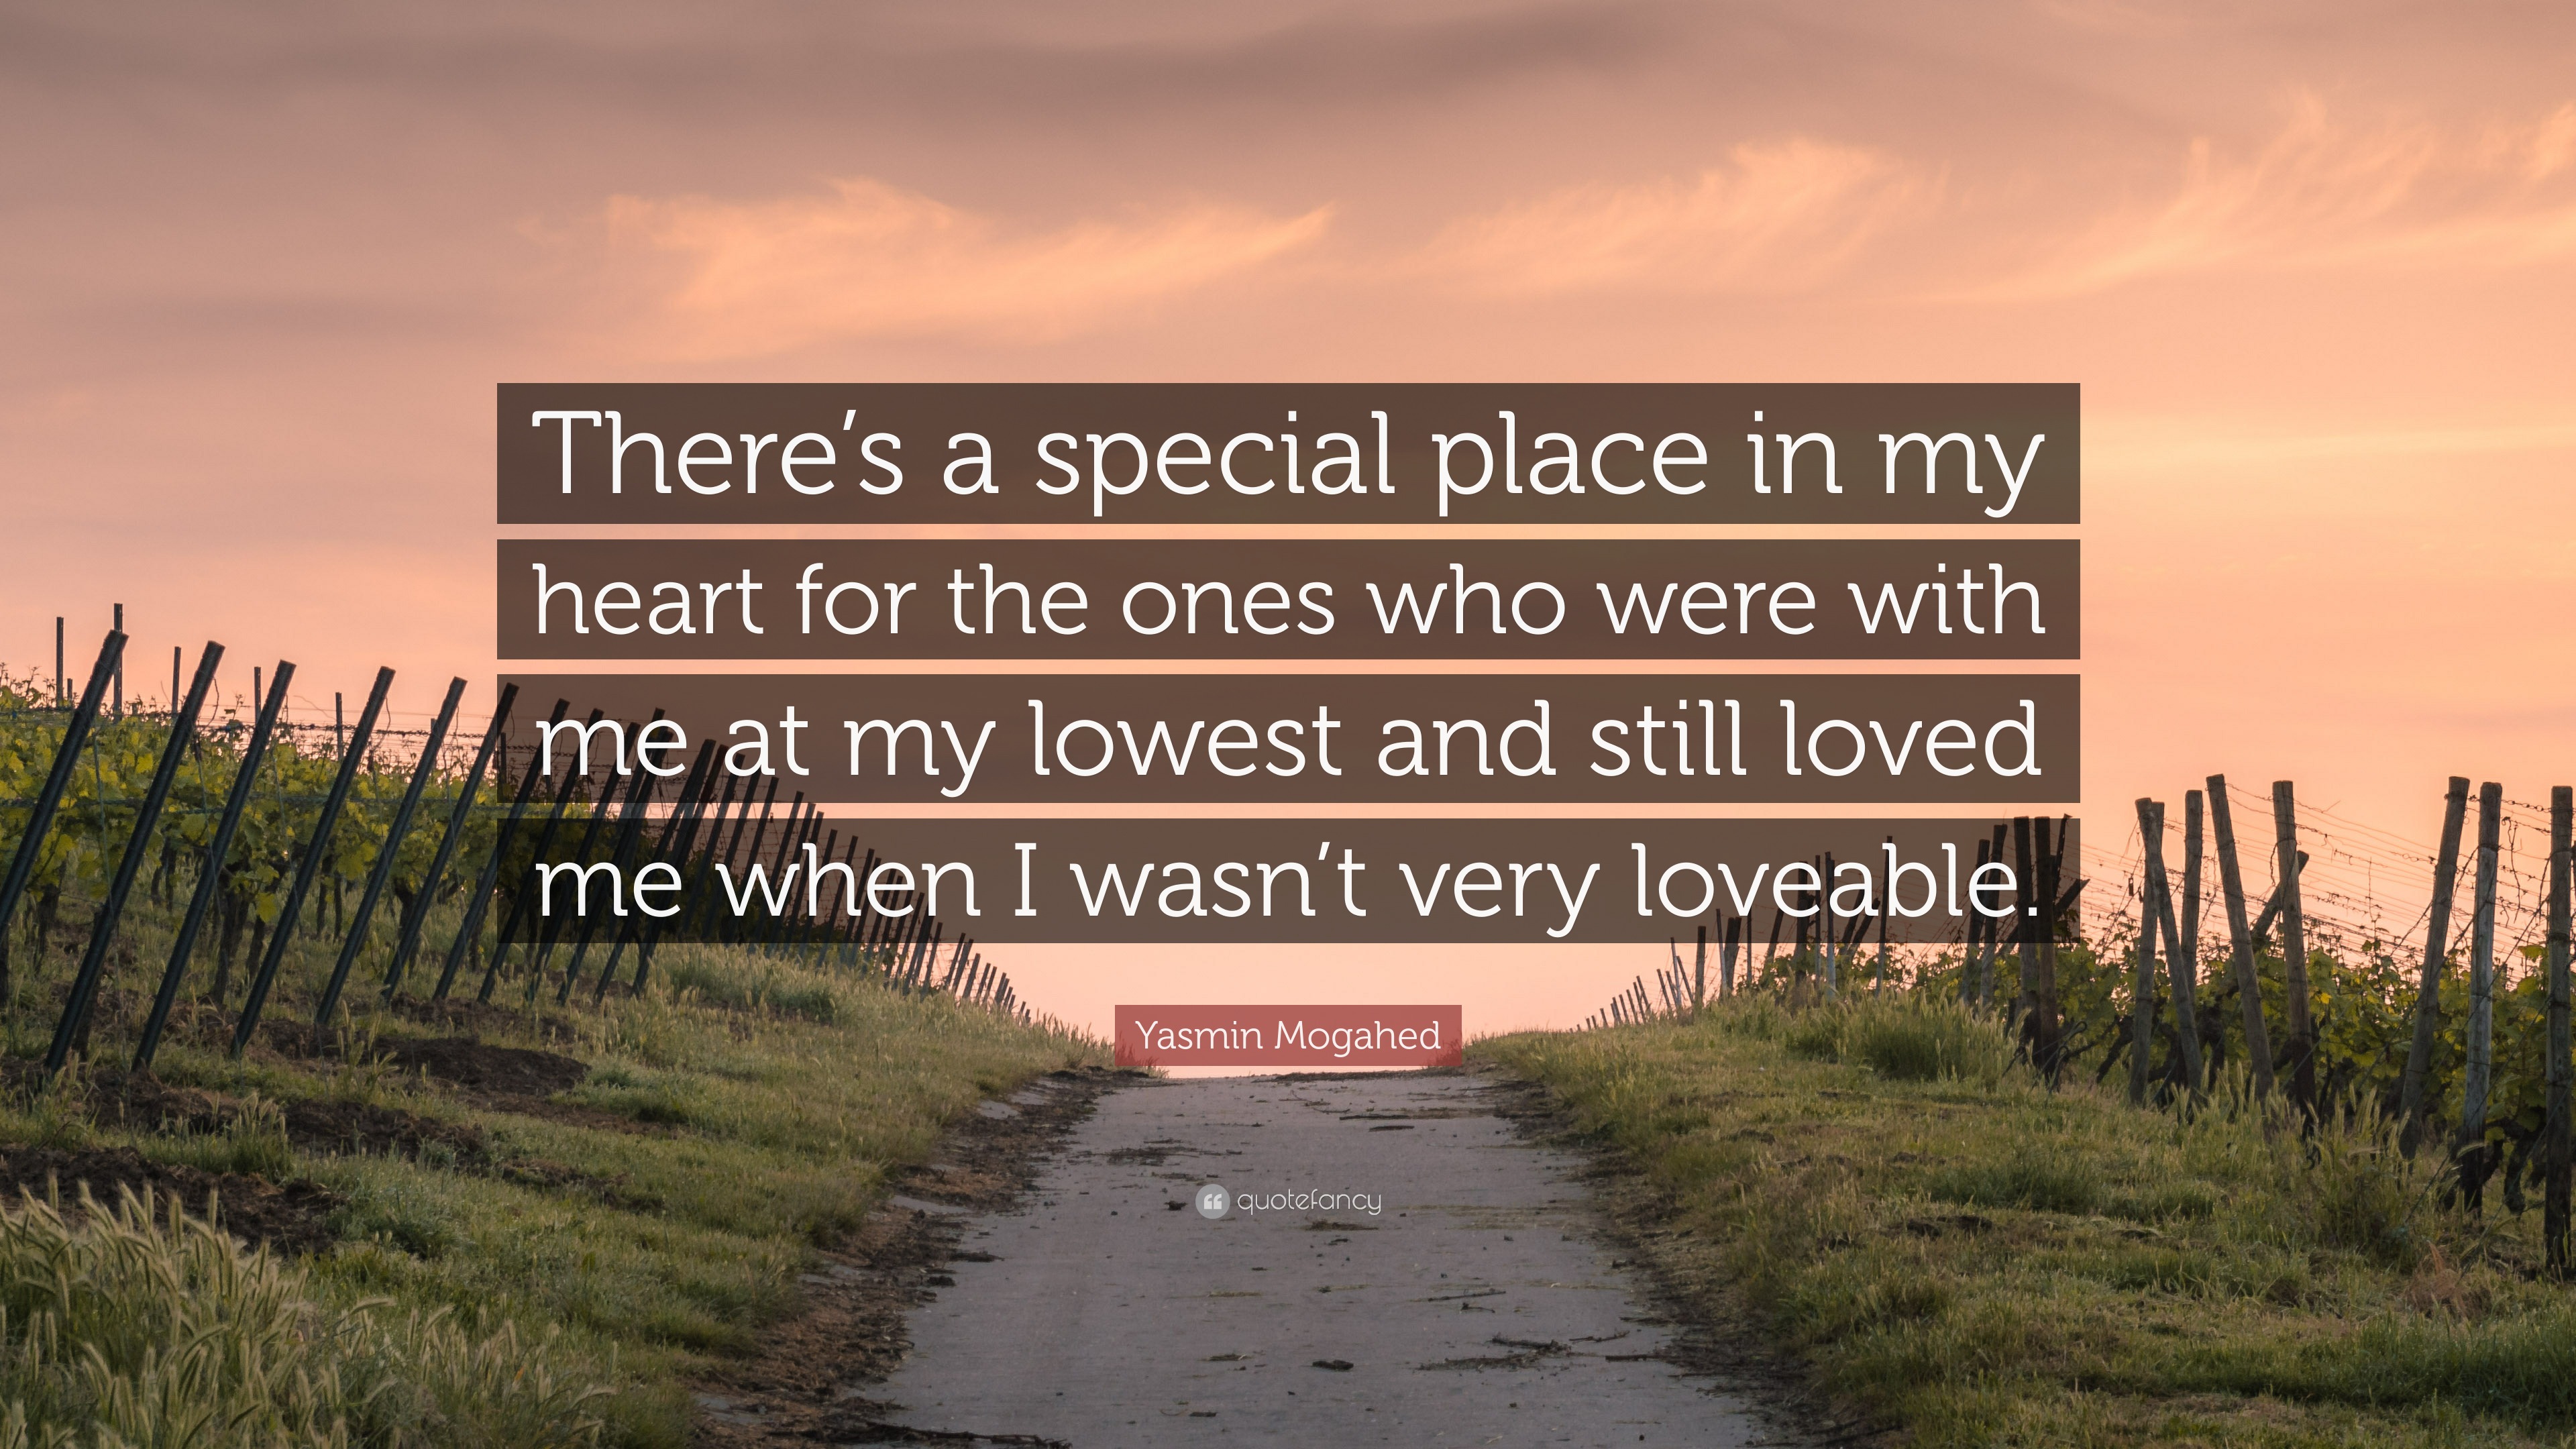 Yasmin Mogahed Quote: “There’s a special place in my heart for the ones ...